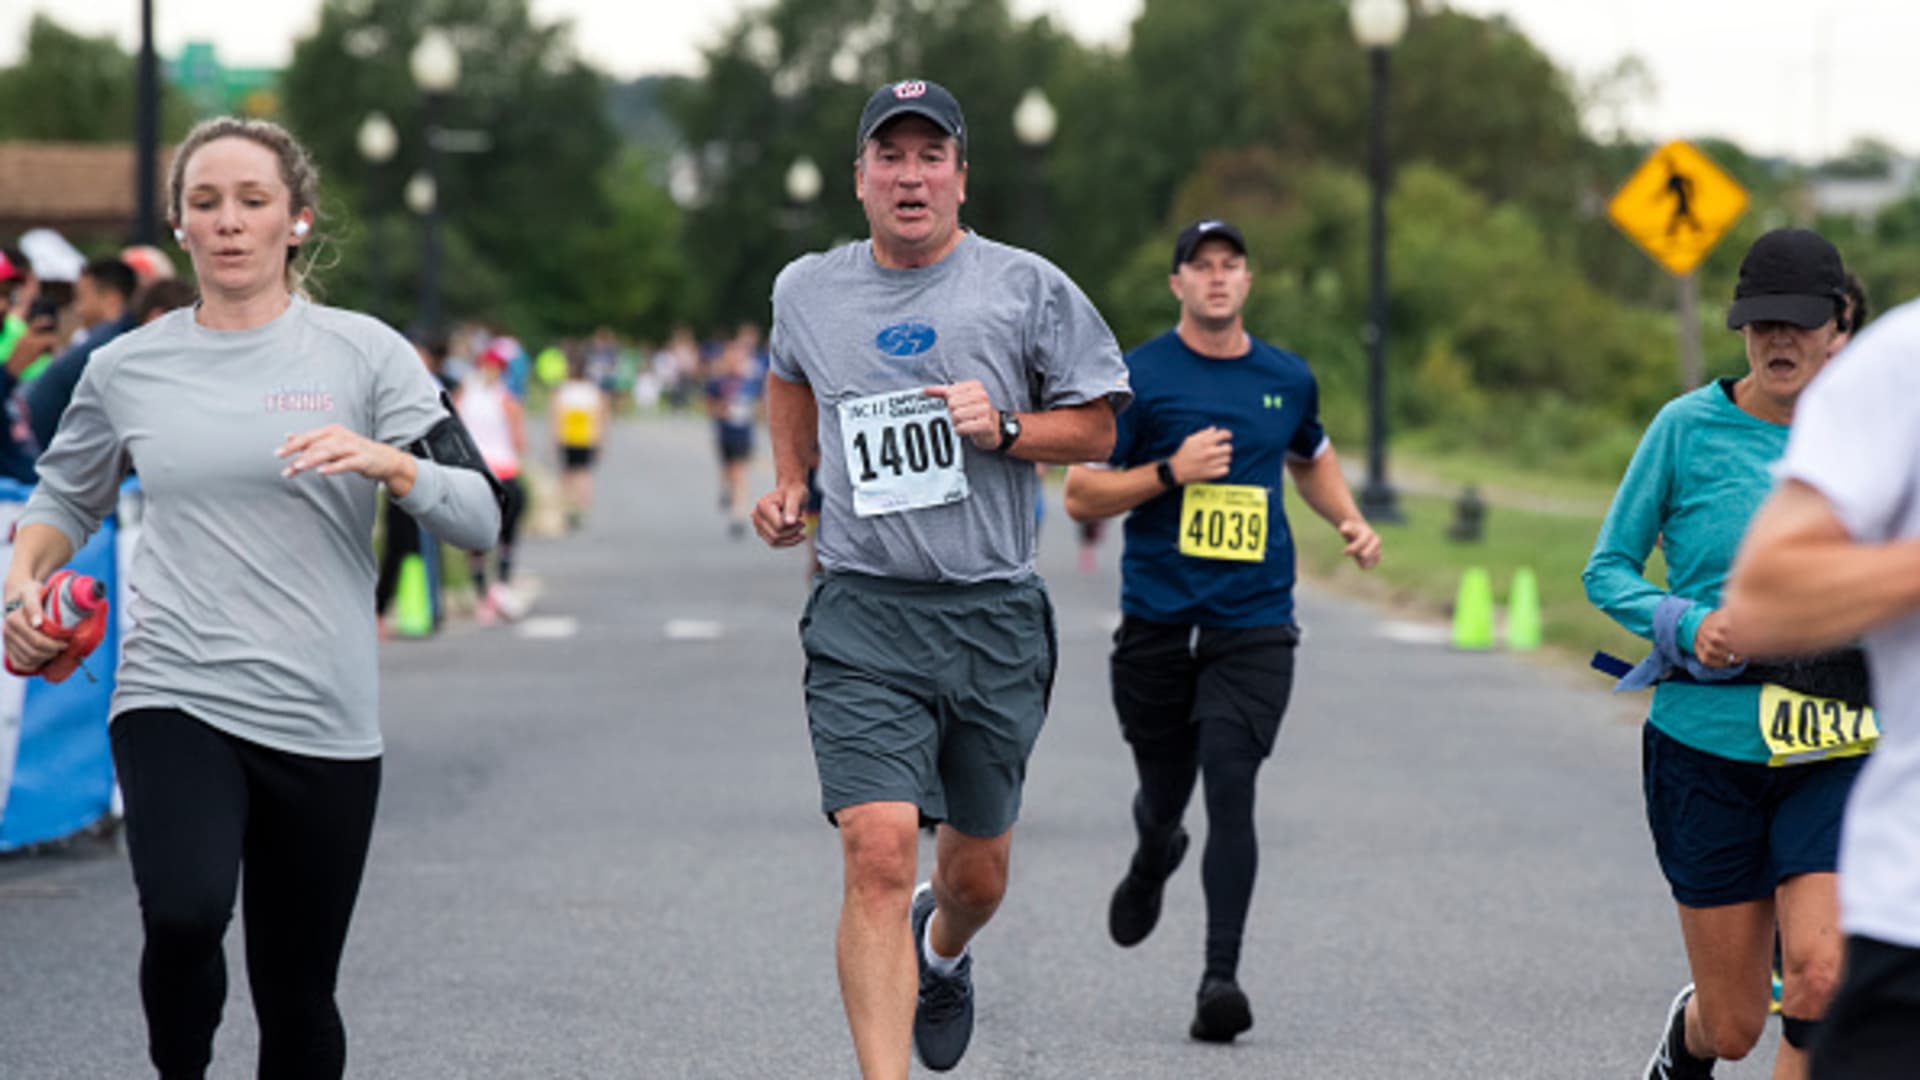 Supreme Court Justice Brett Kavanaugh crosses the finish line during the ACLI Capital Challenge 3 Mile Team Race in Anacostia Park on Wednesday, September 29, 2021.